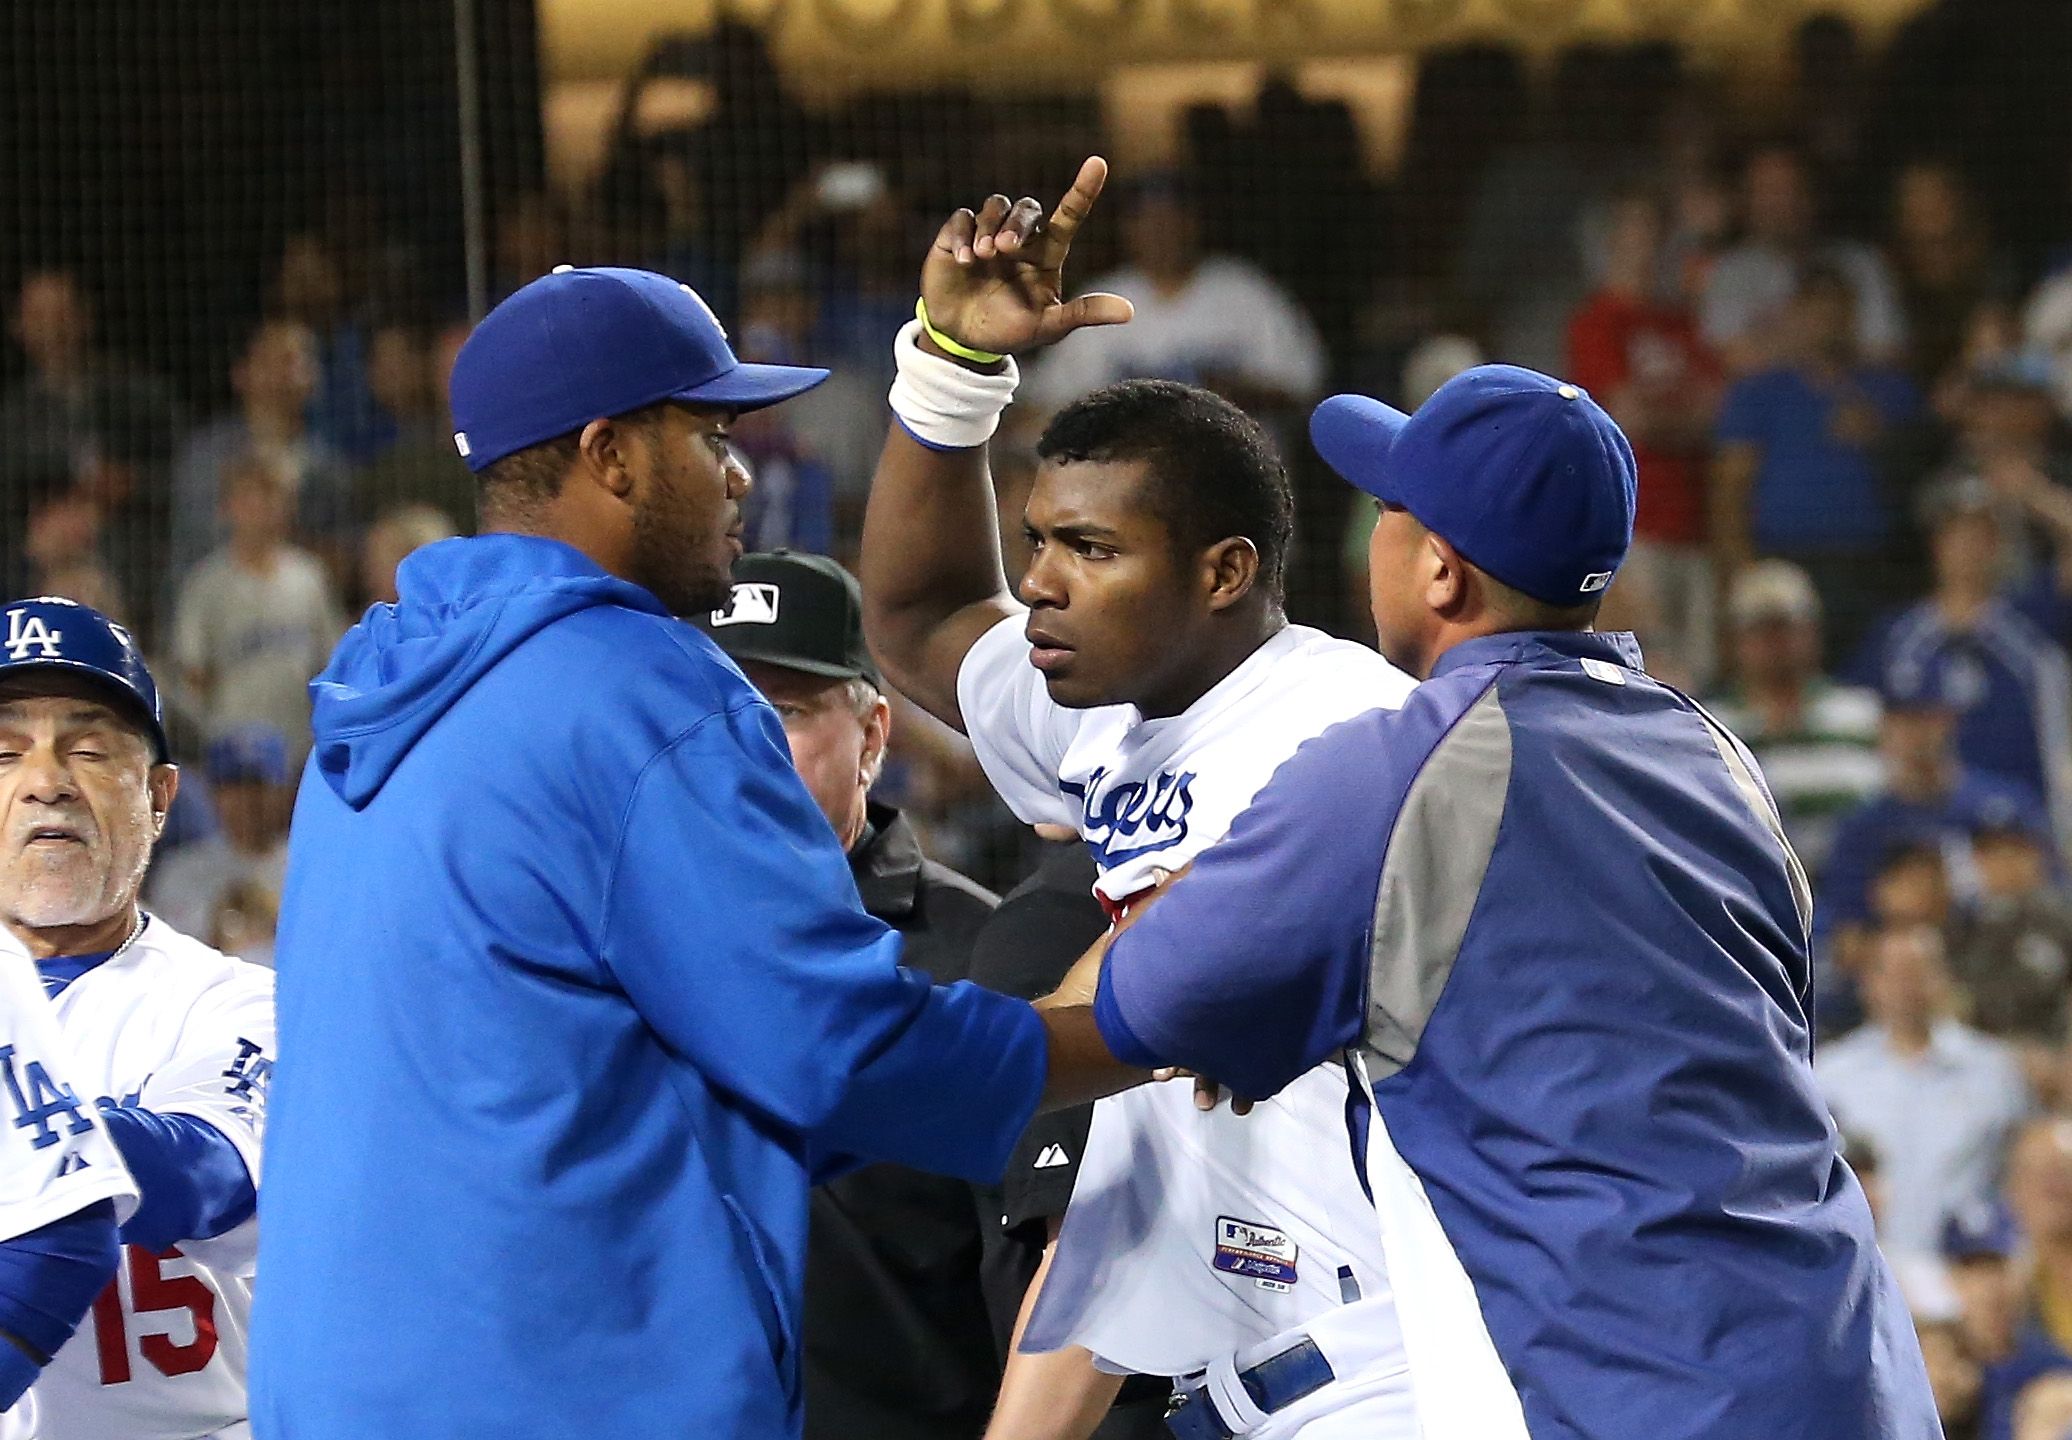 Los Angeles Dodgers still fuming, waiting for discipline after brawl with Arizona Diamondbacks National Post picture